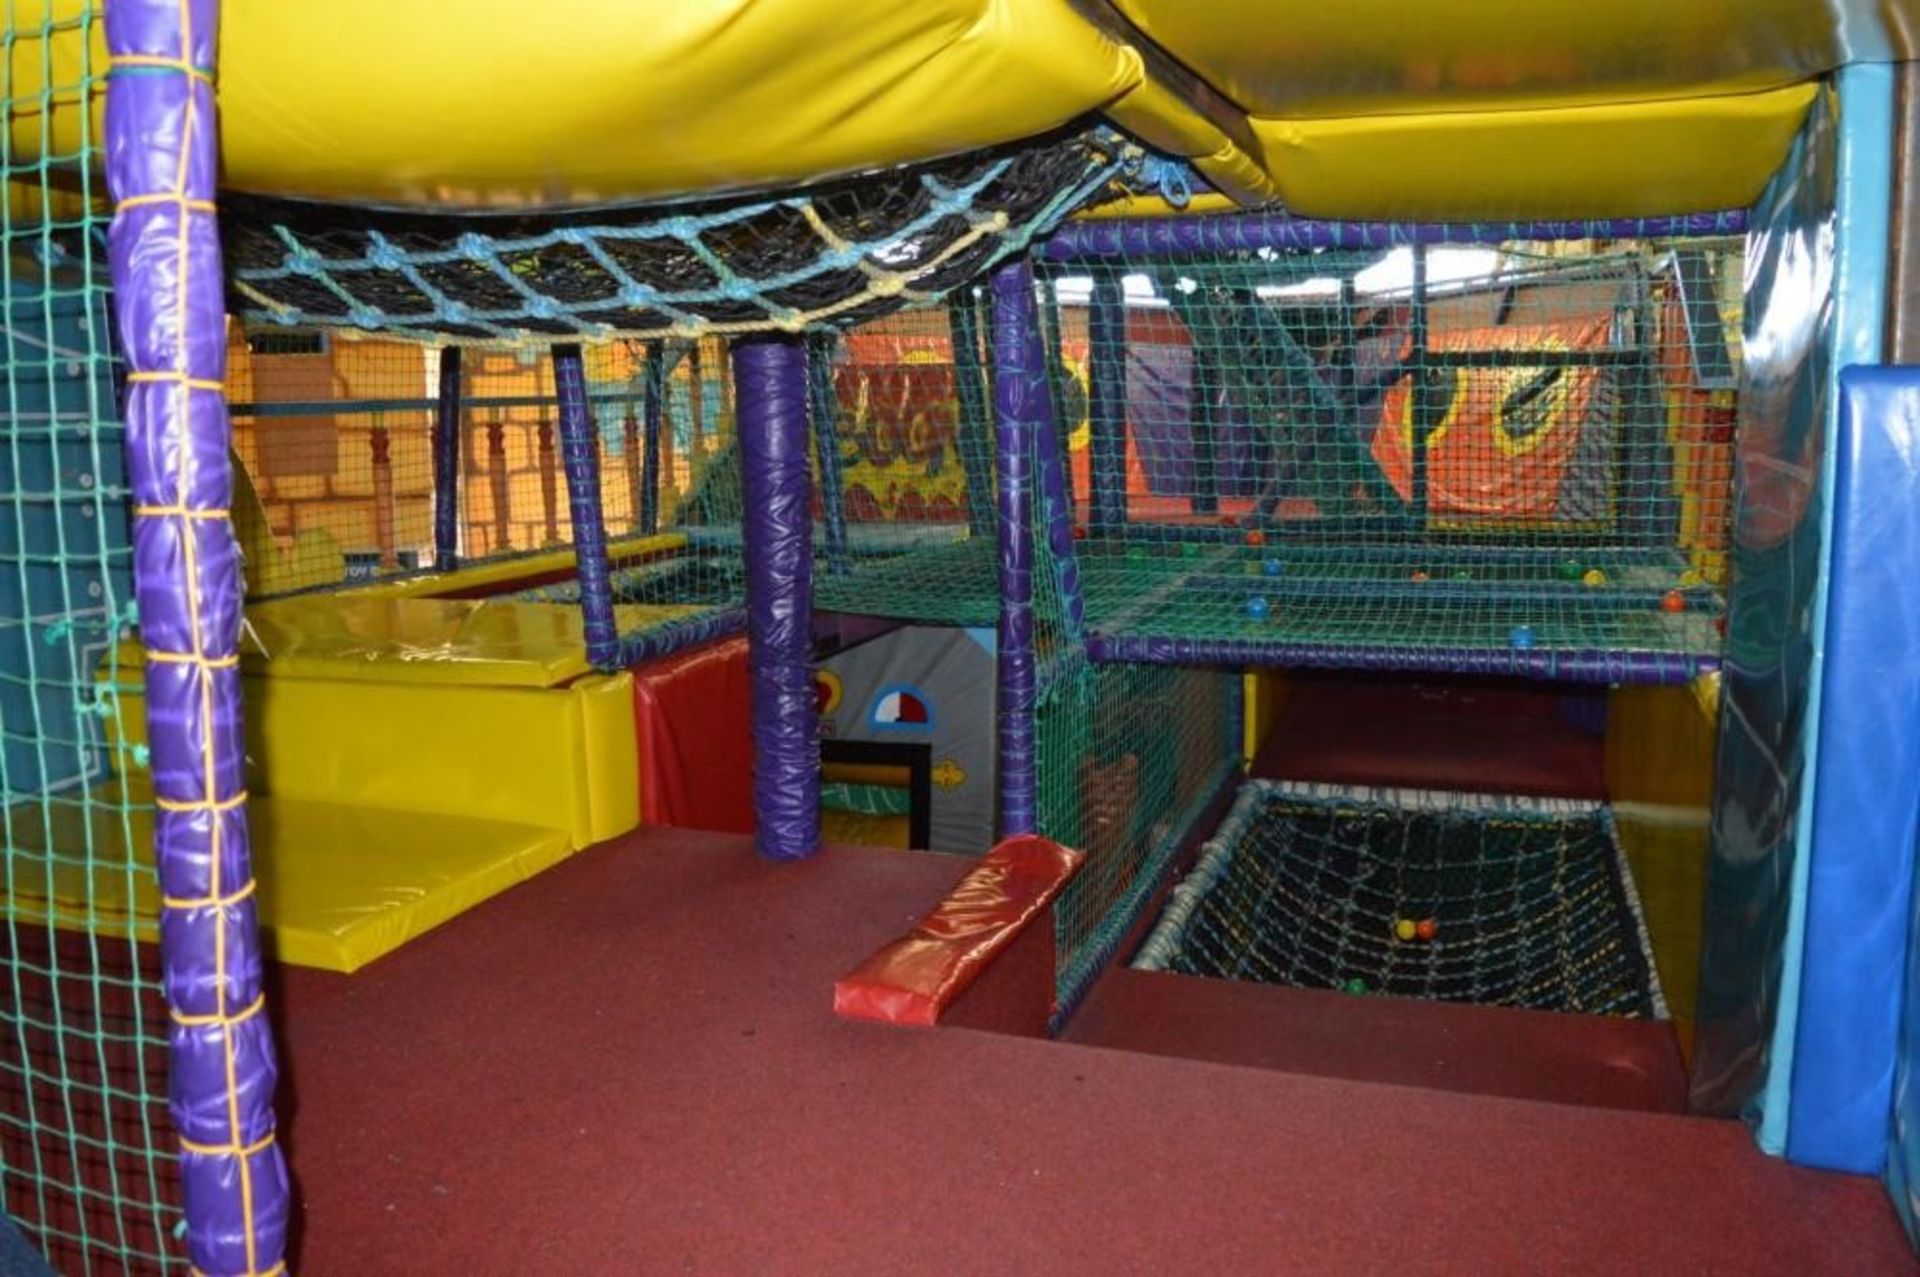 Botany Bay Puddletown Pirates Play Centre - The Only Pirate Themed Play Centre in the North West - F - Image 22 of 30